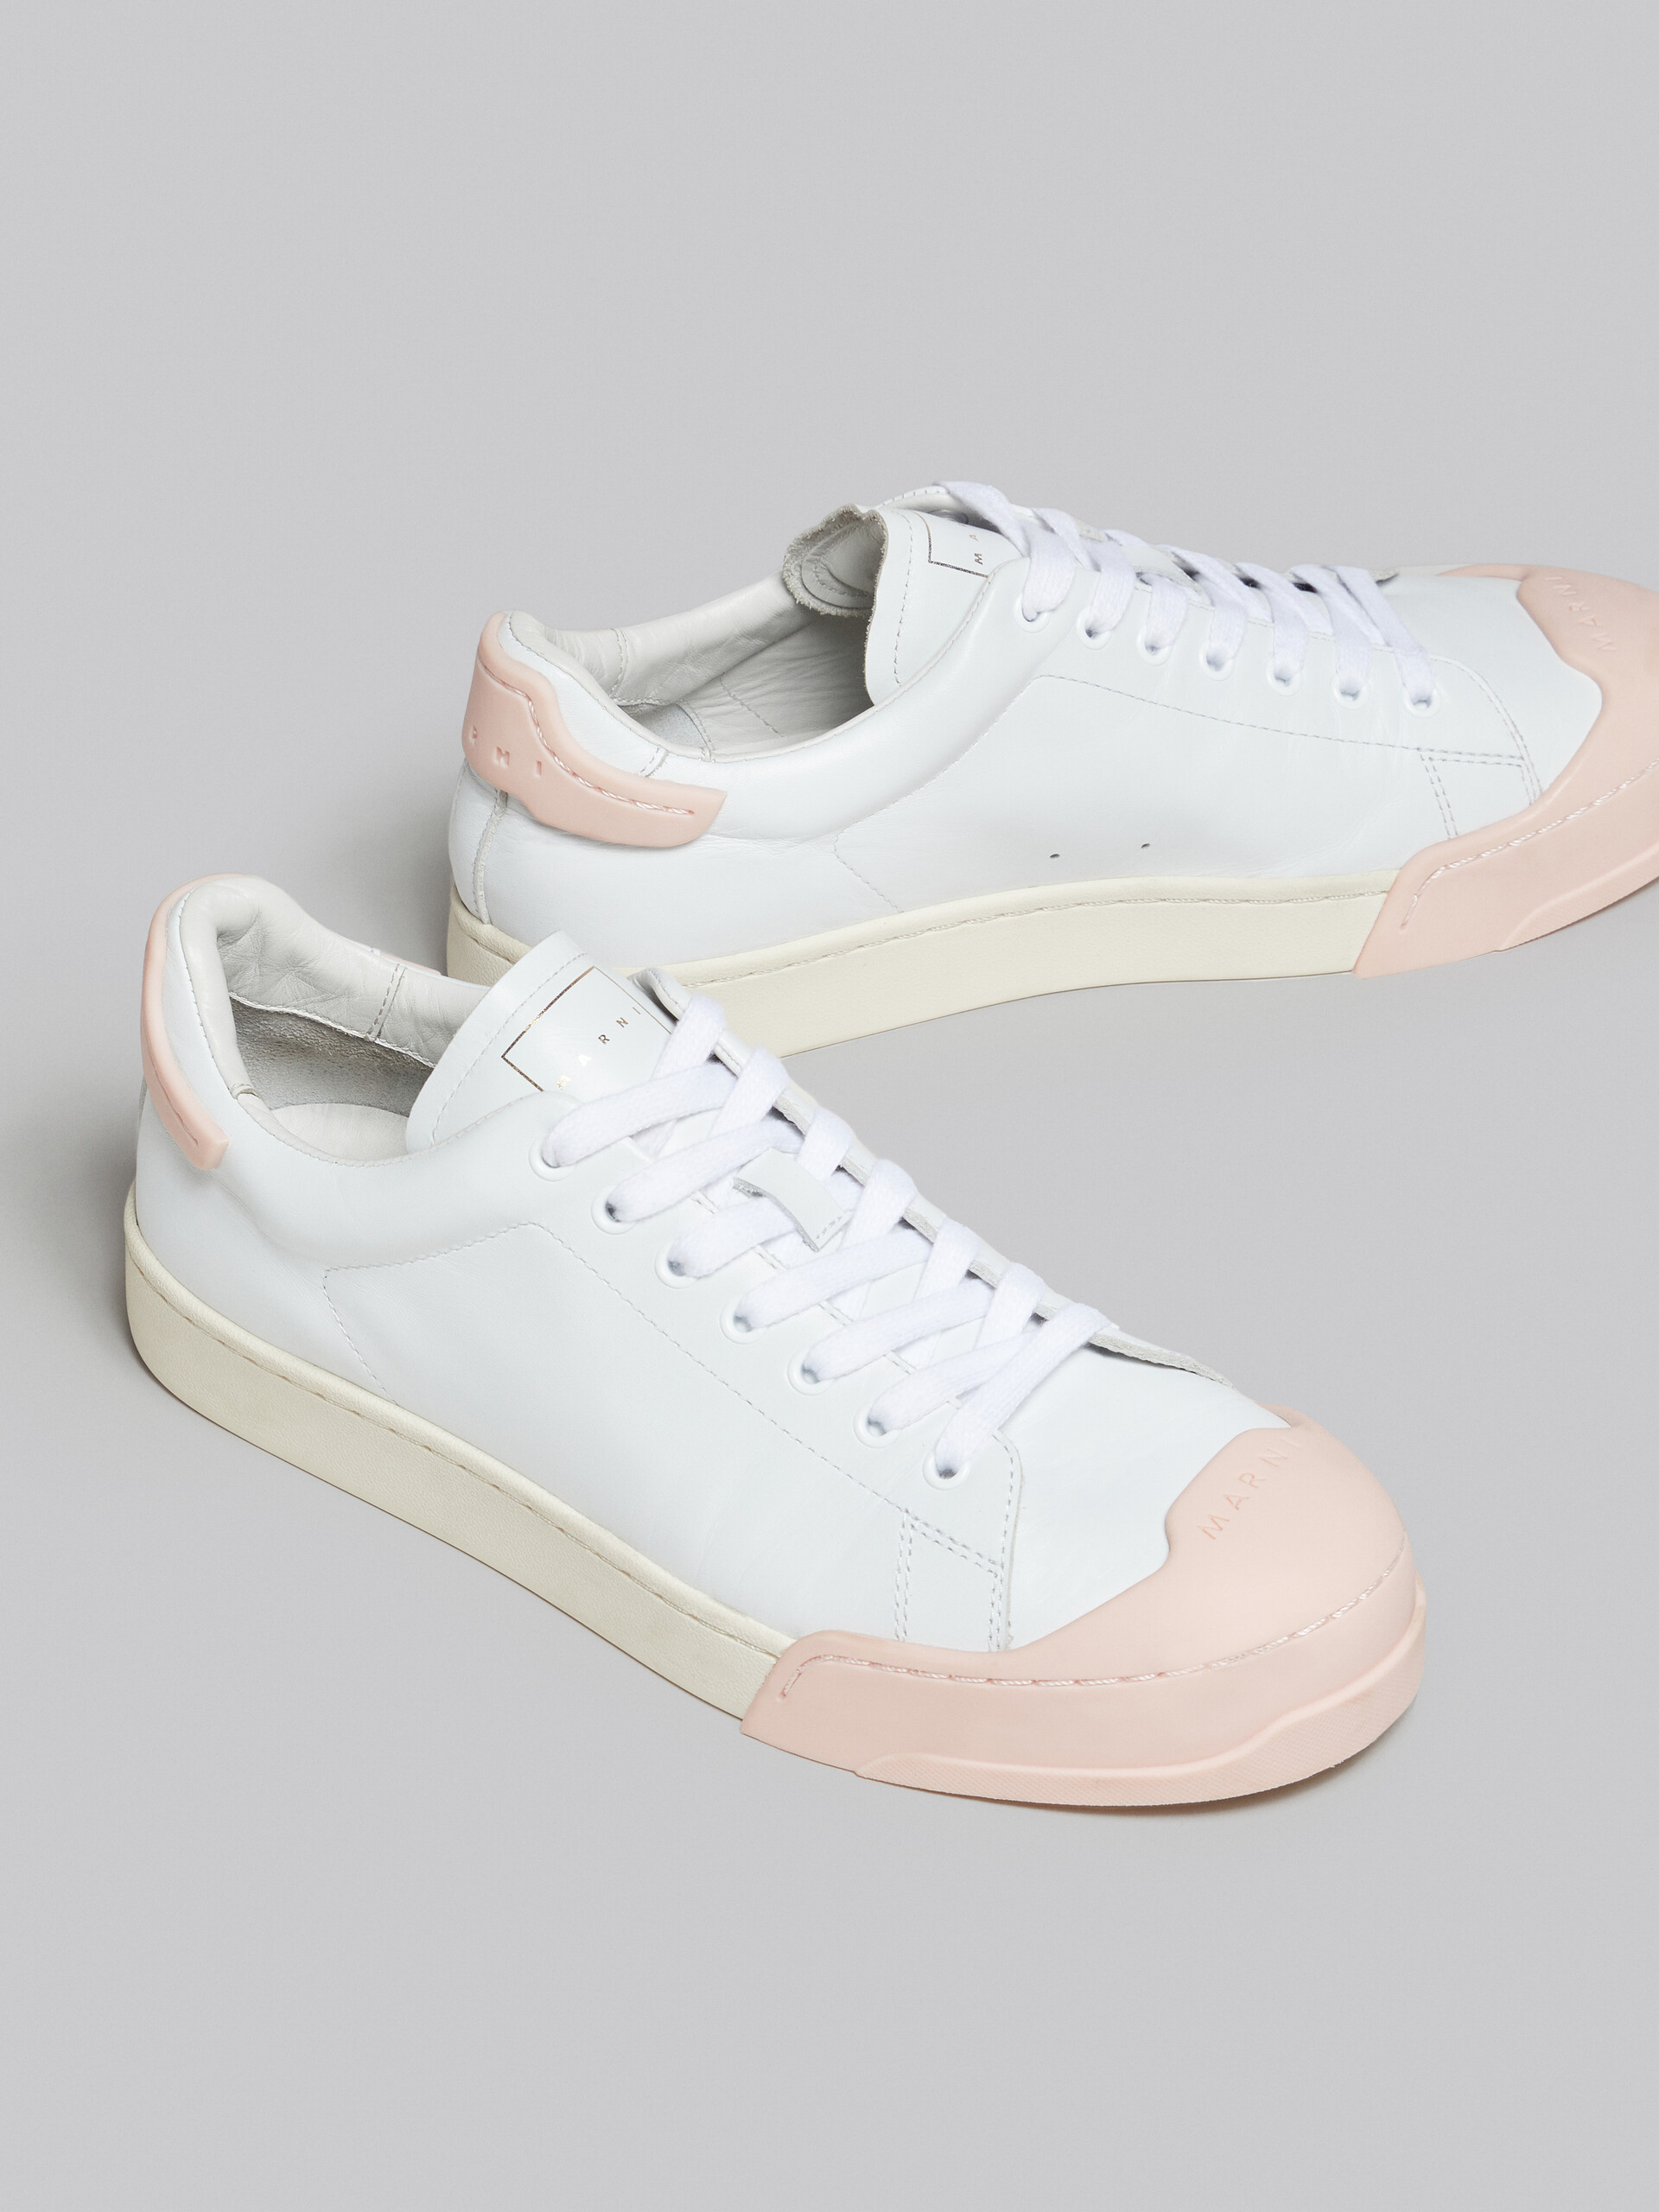 Dada Bumper sneaker in white and pink leather - Sneakers - Image 5